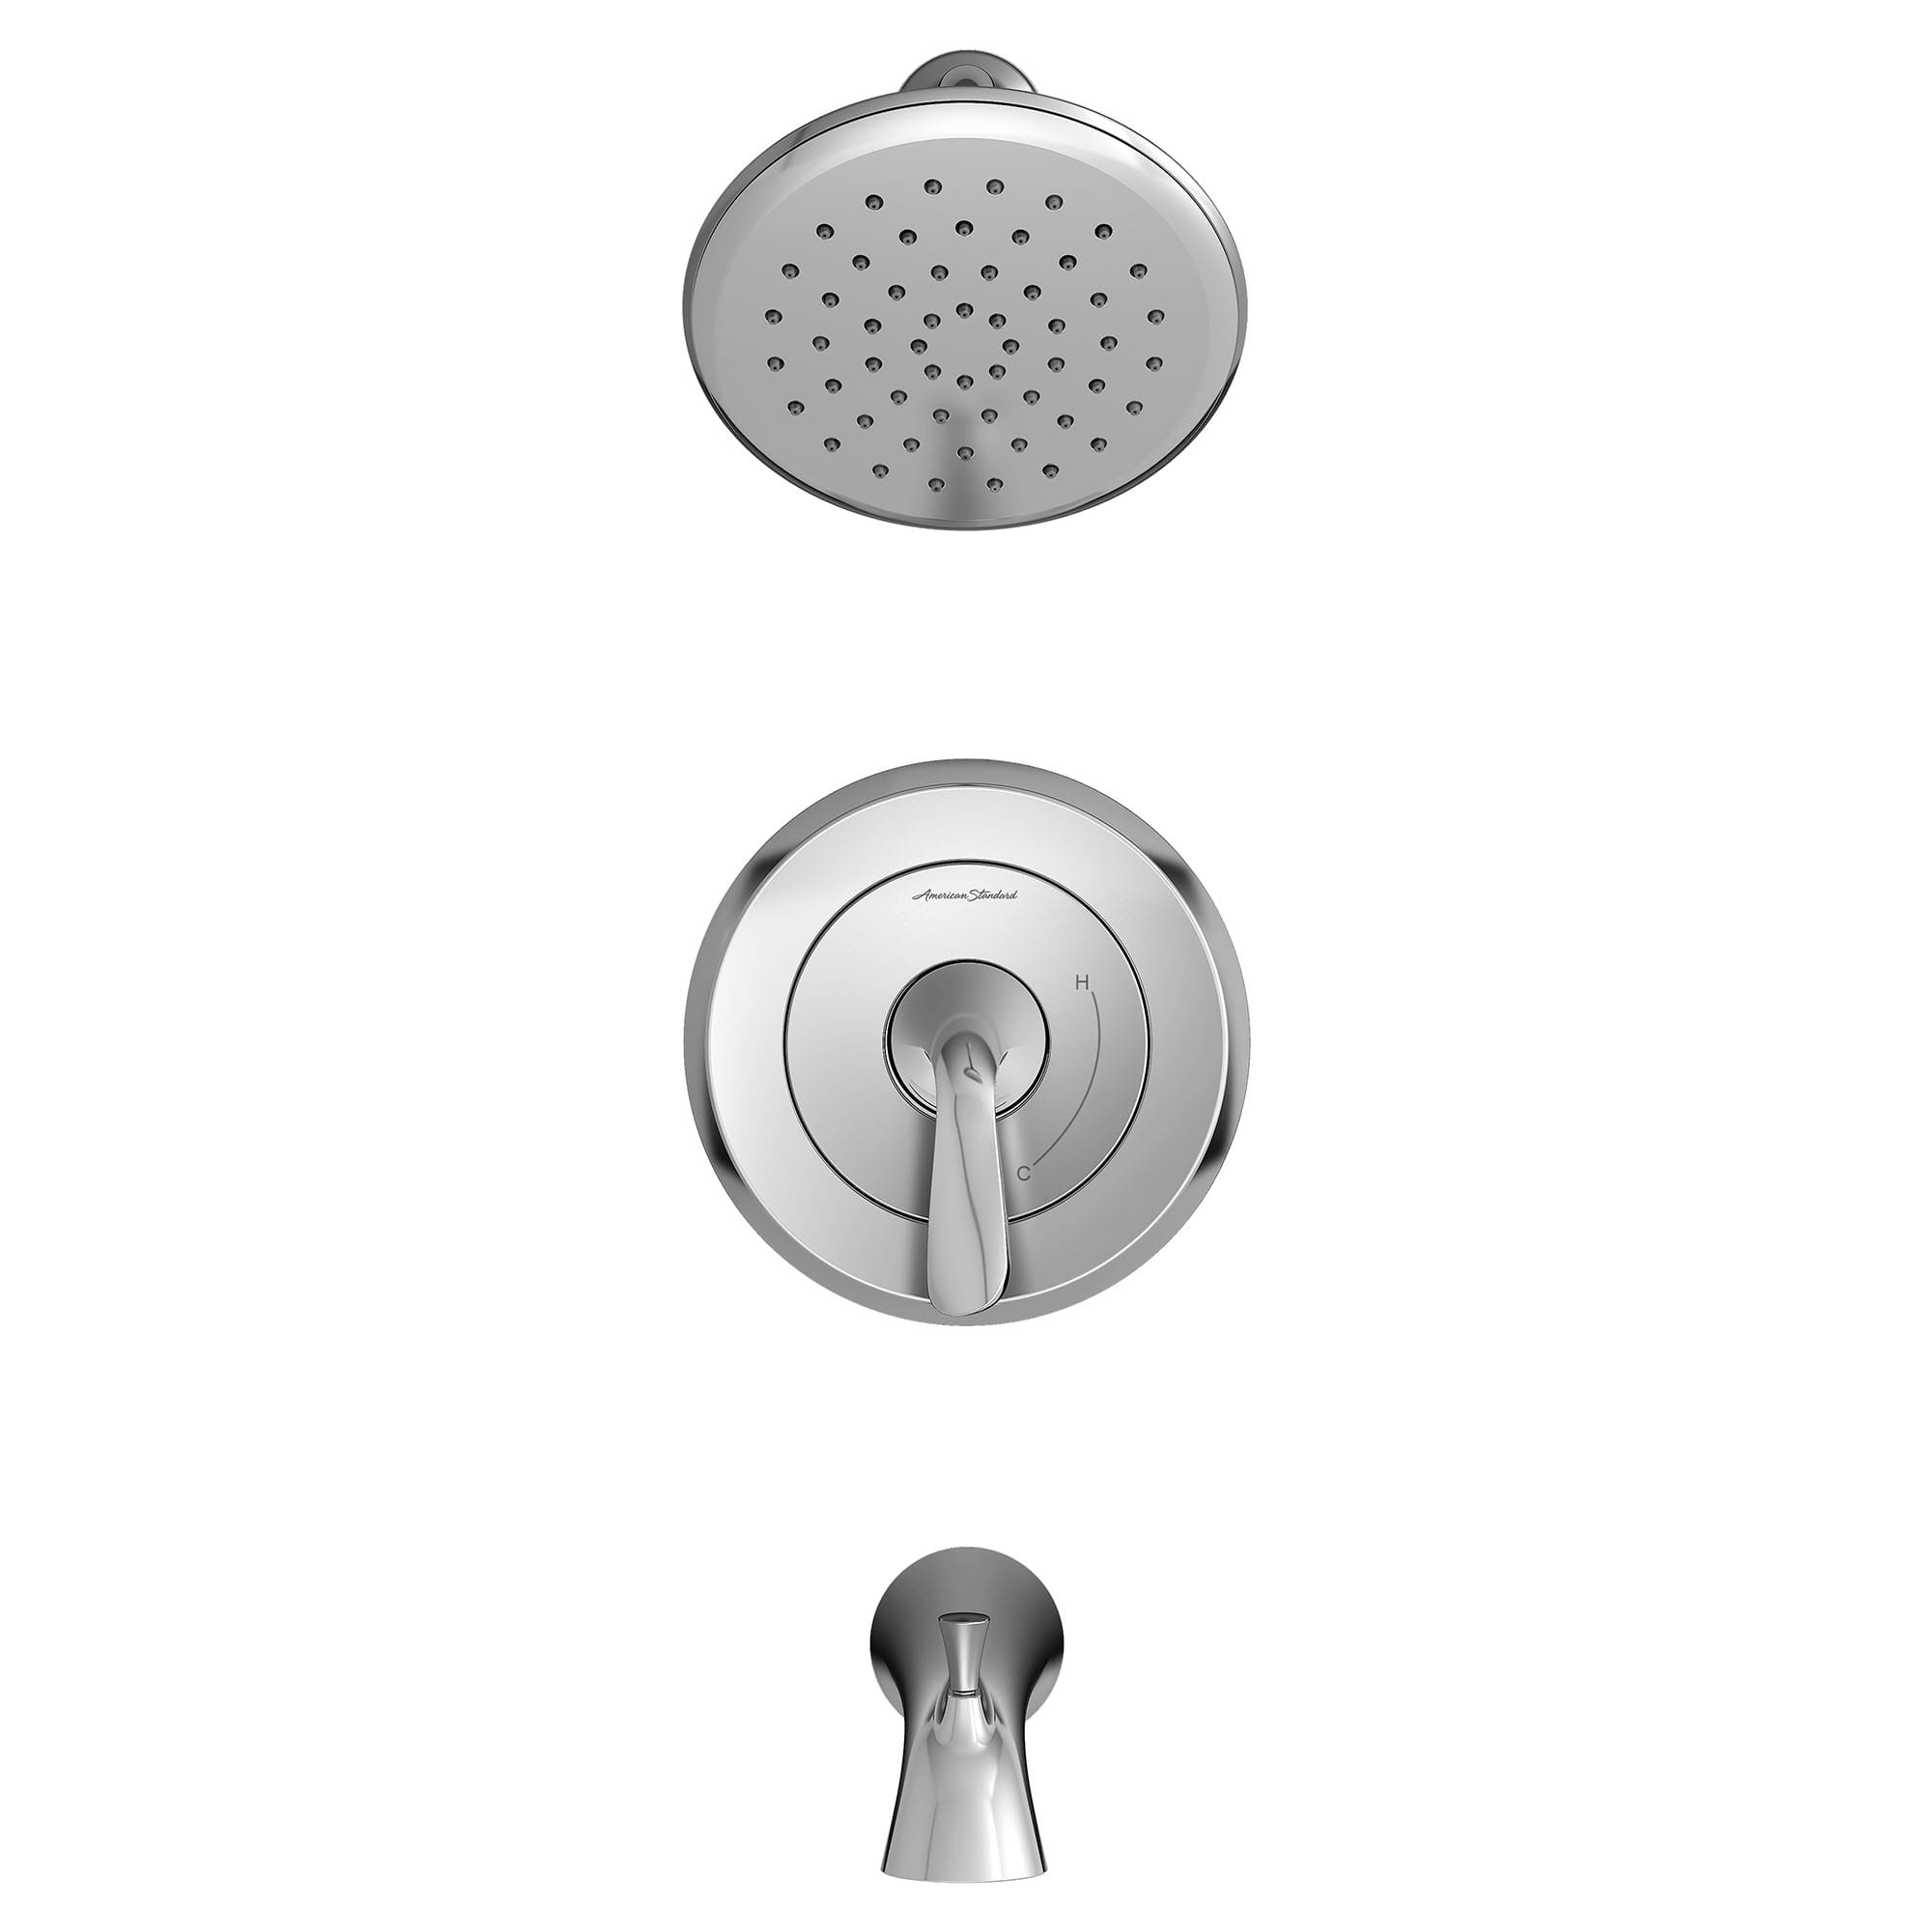 Fluent 18 gpm 68 L min Tub and Shower Trim Kit With Water Saving Showerhead Double Ceramic Pressure Balance Cartridge With Lever Handle CHROME